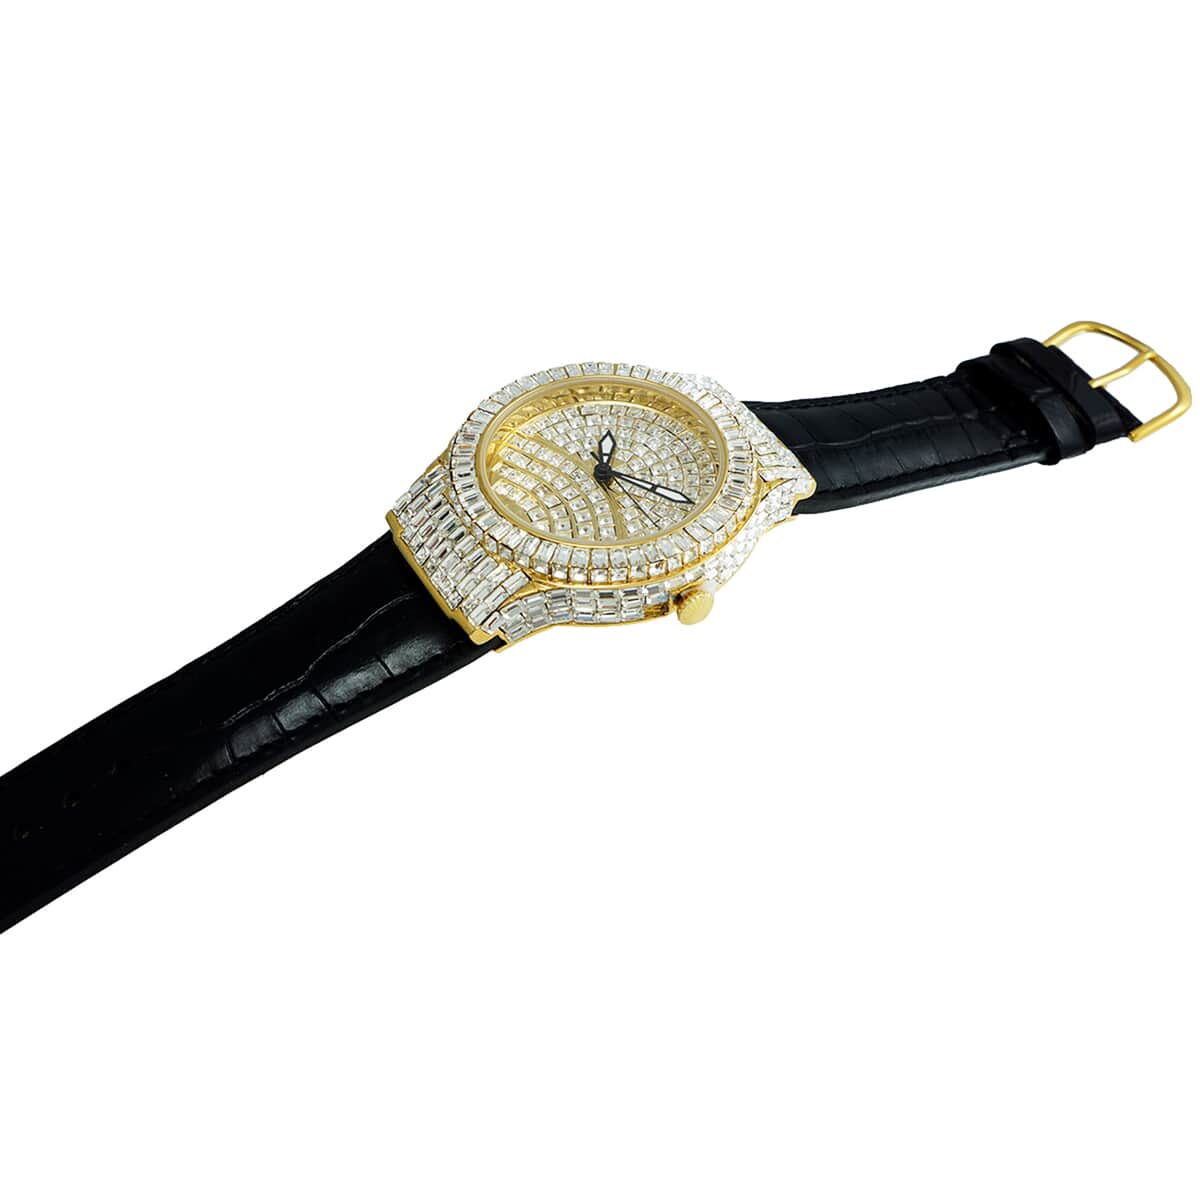 ADEE KAYE Austrian Crystal Japan Quartz Movement Goldtone Dial Watch in Black Leather Band (26 mm) image number 1